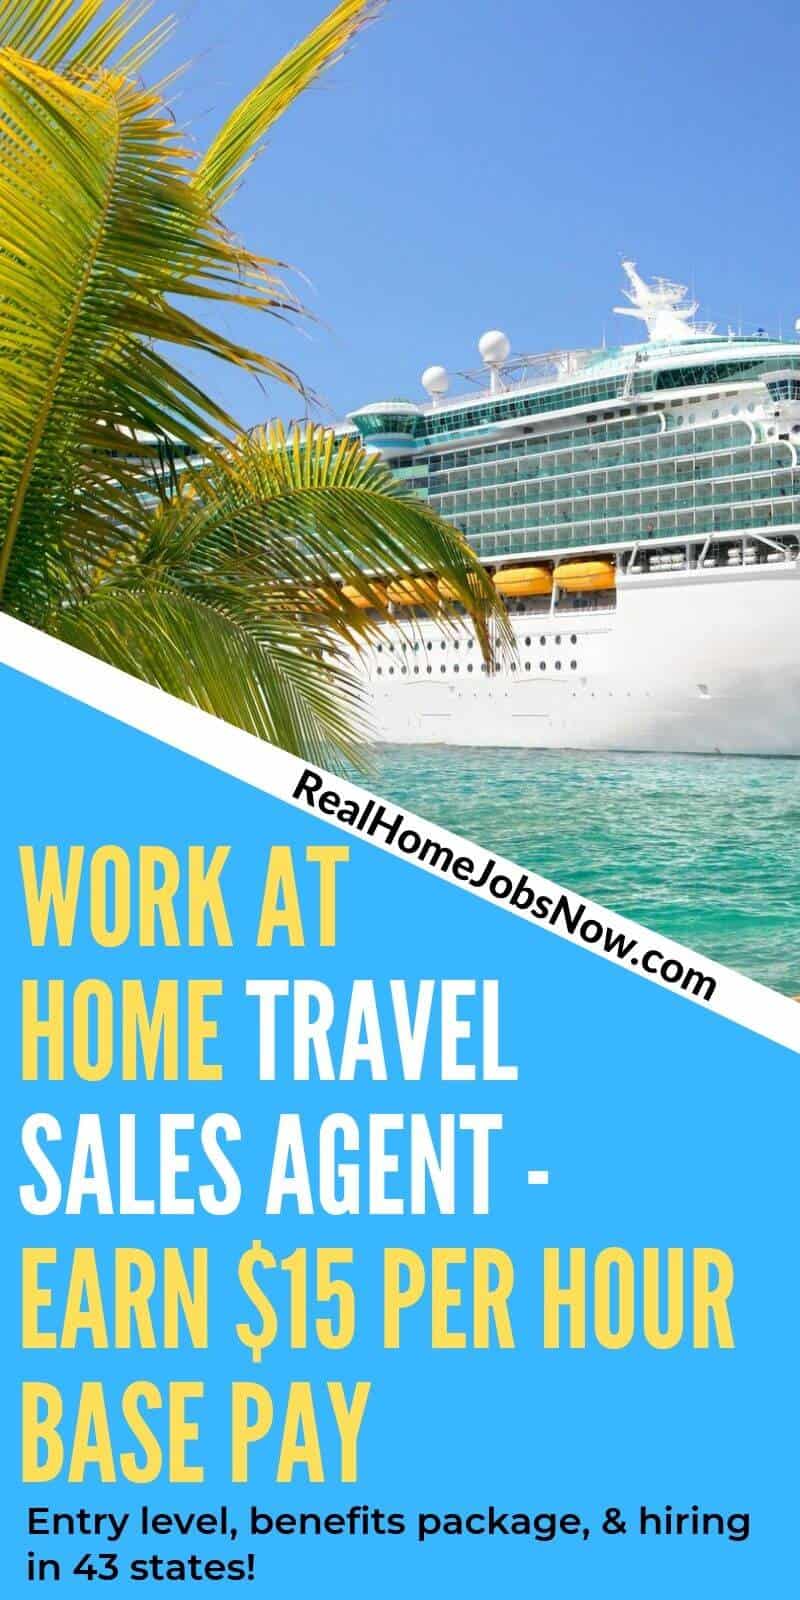 Here's a way you can work from home in the travel industry even if you don't have experience! You can be a Travel Sales Agent earning $15 per hour plus benefits.  This is a legitimate full-time job that will teach you everything you need to know during the training period!  #workfromhome #workfromhomejobs #workfromhomecompanies #workfromhomeonline #workathome #workathomejobs #wahm #onlinejobs #remotejobs #remotework #moneyfromhome